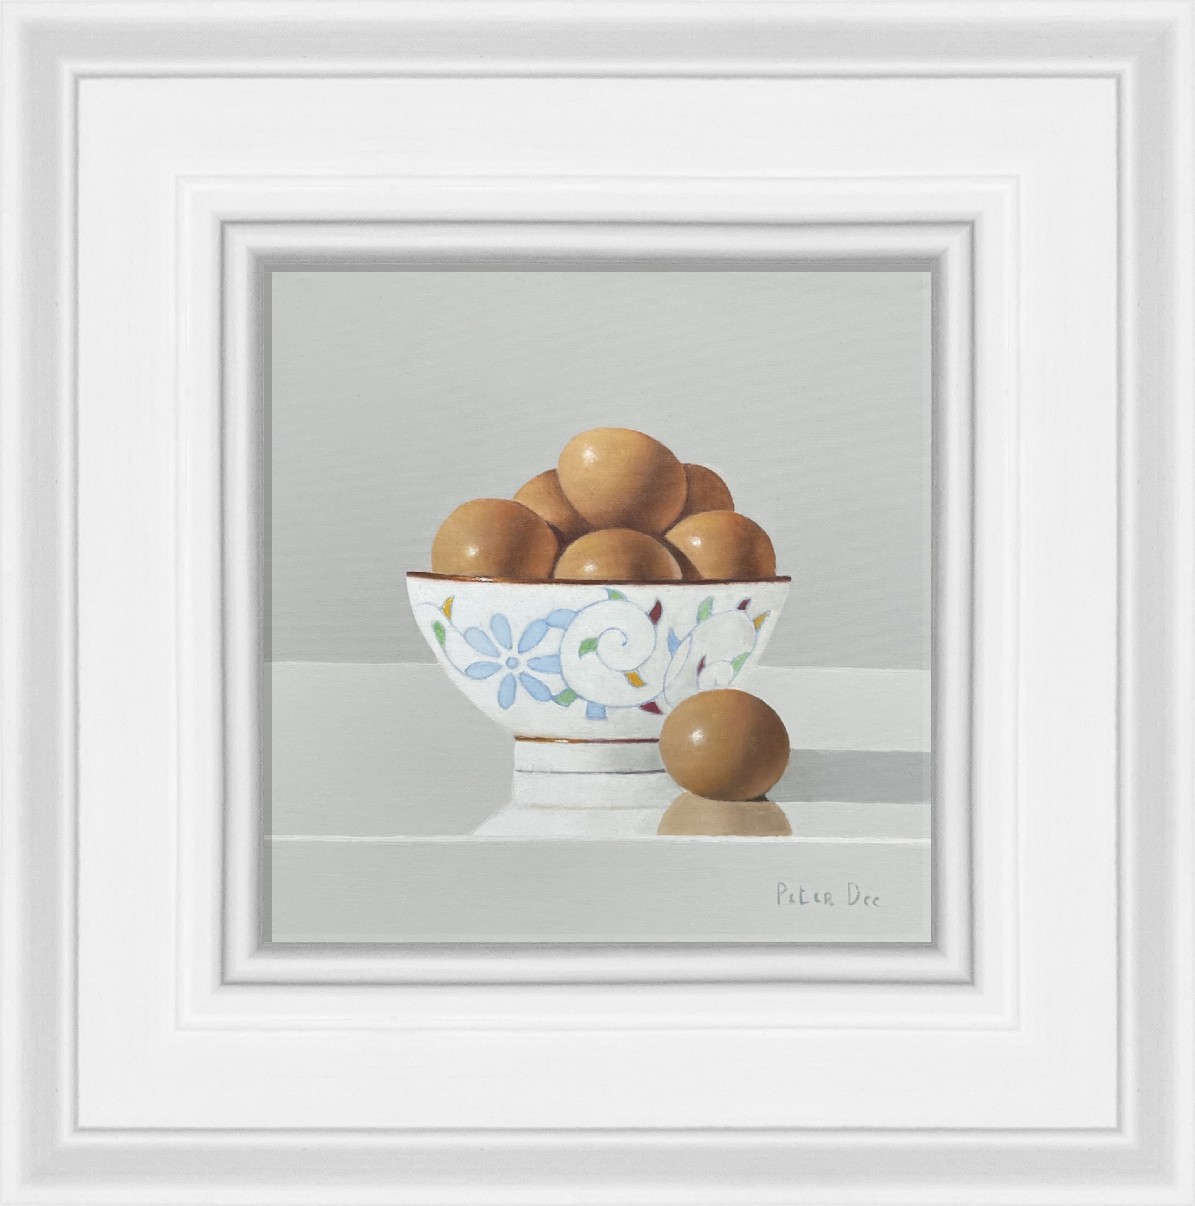 Bowl of Eggs  by Peter Dee